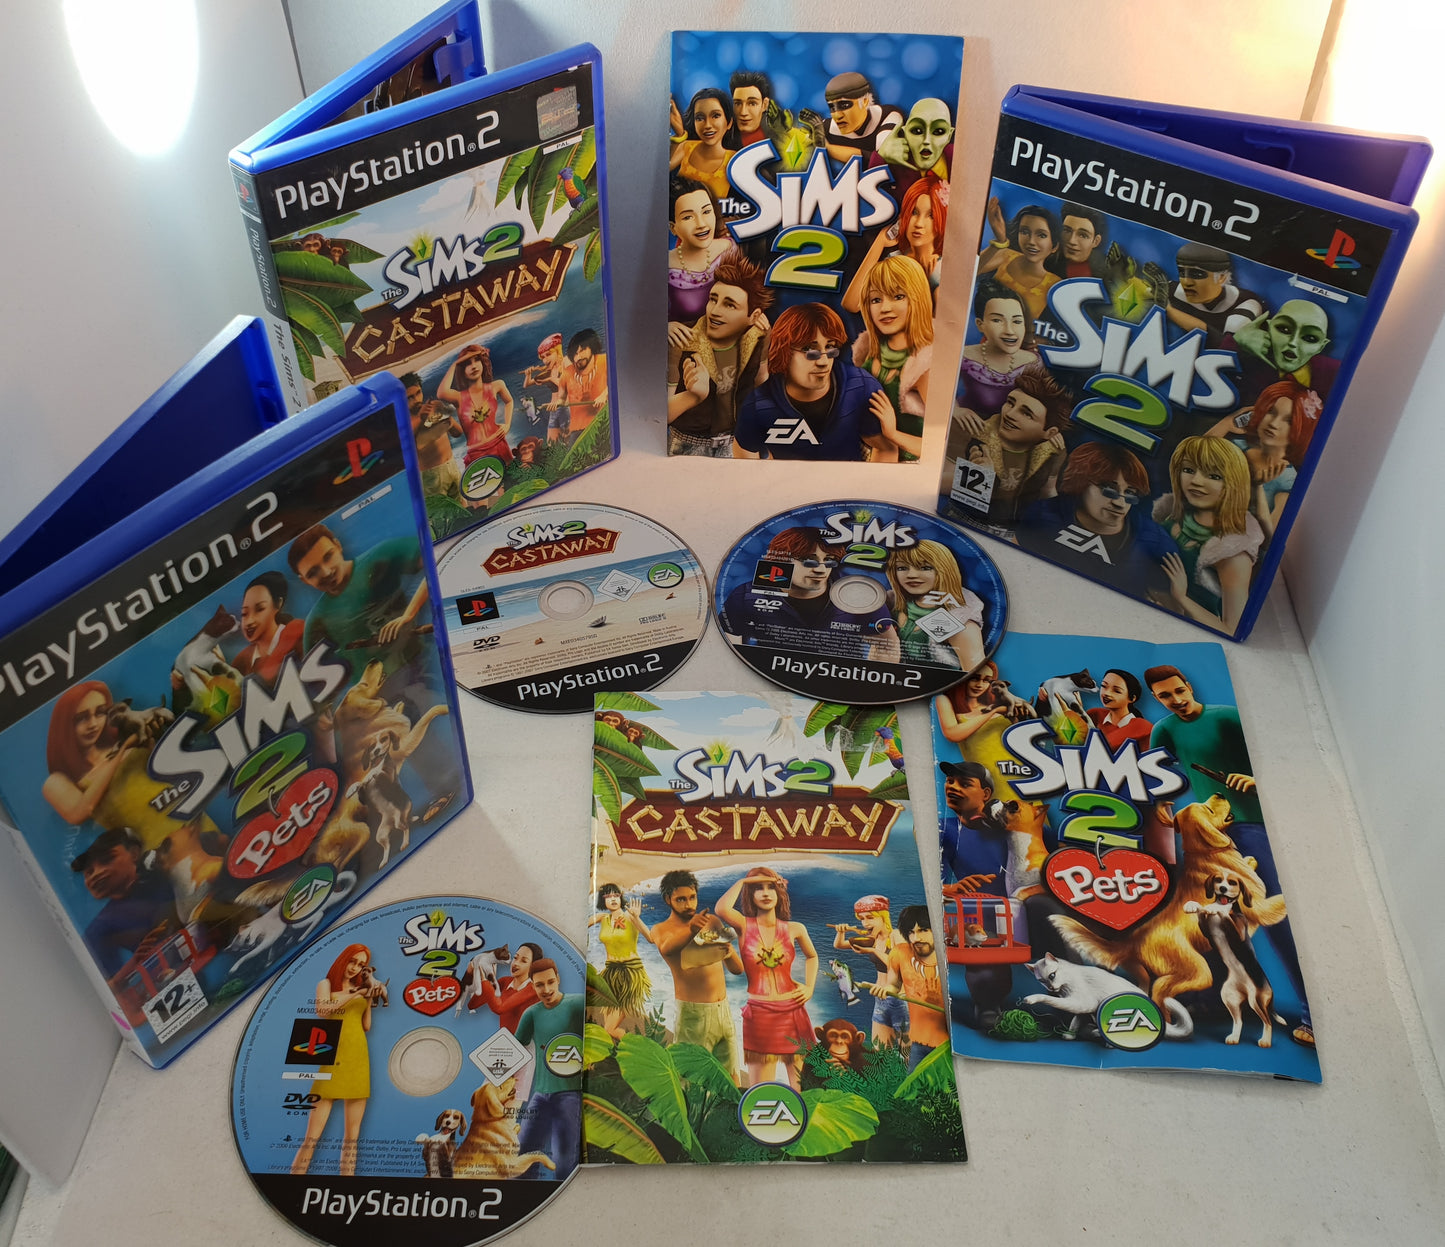 The Sims 2 Sony Playstation 2 (PS2) Game Bundle